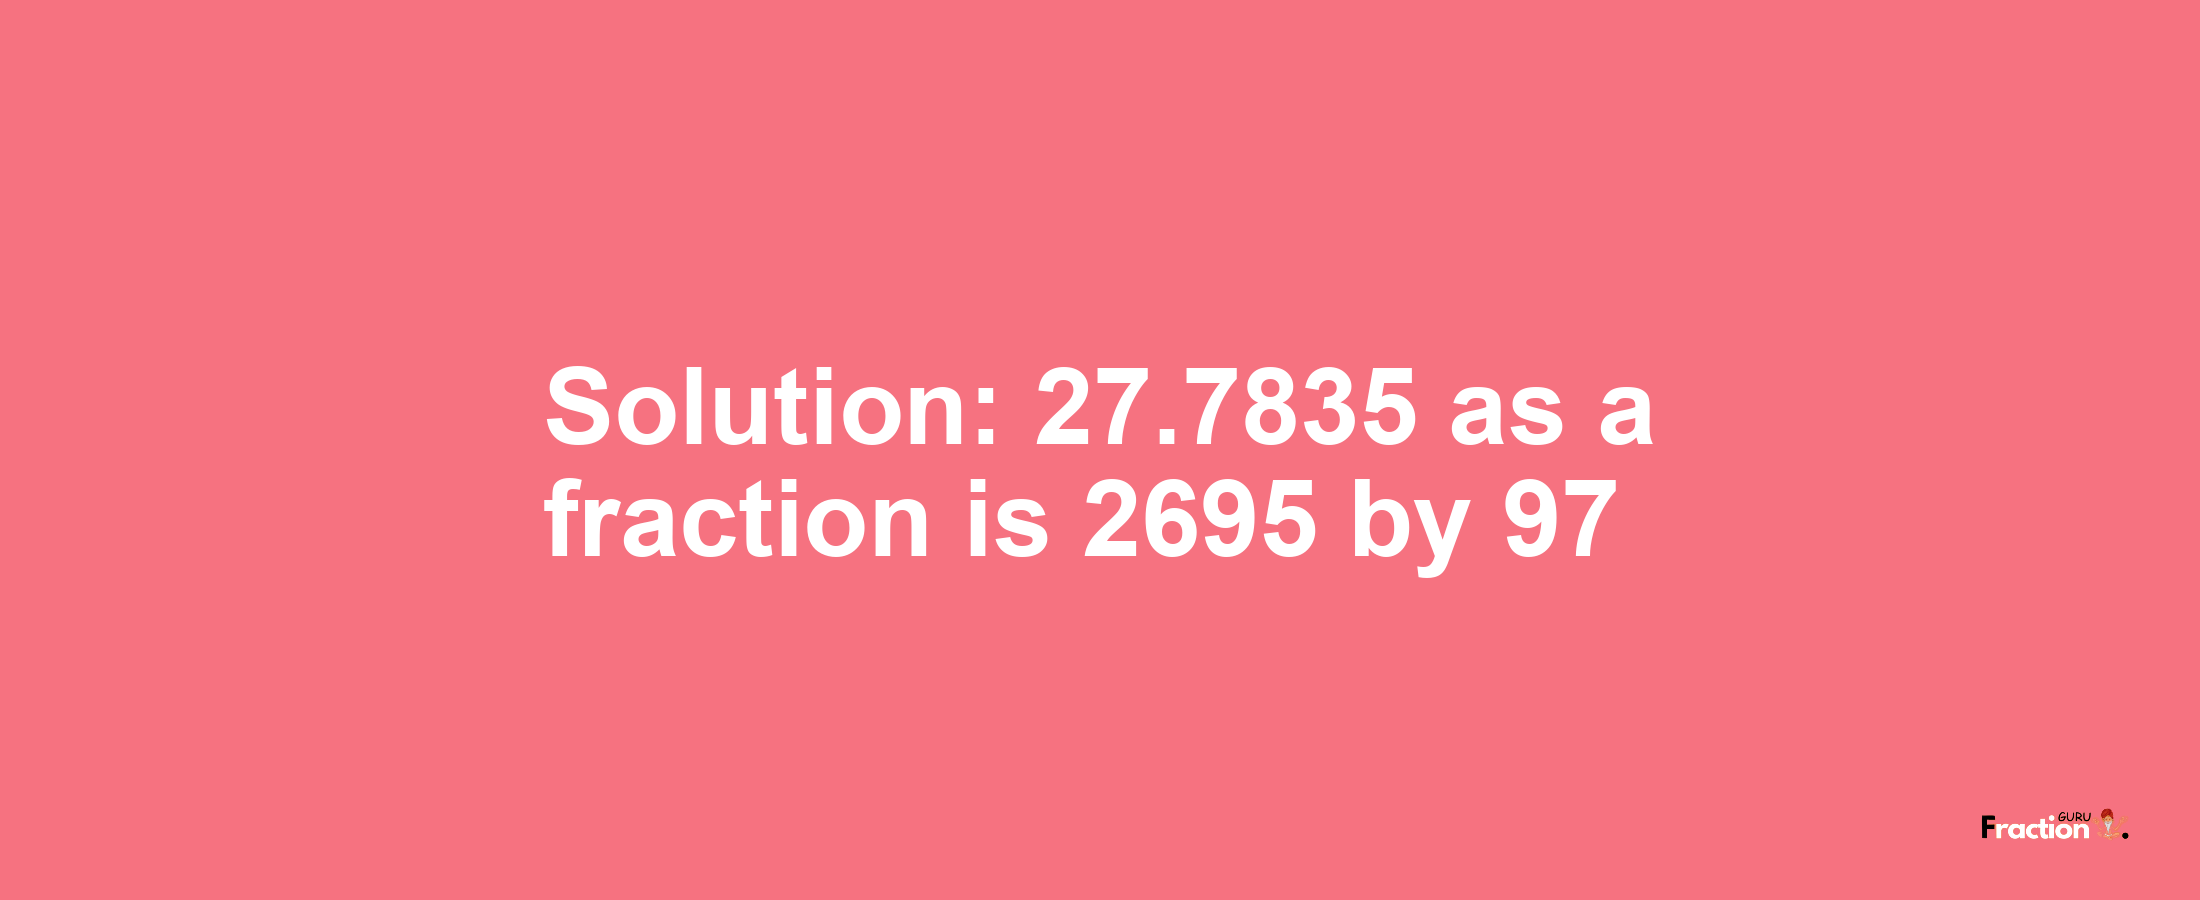 Solution:27.7835 as a fraction is 2695/97